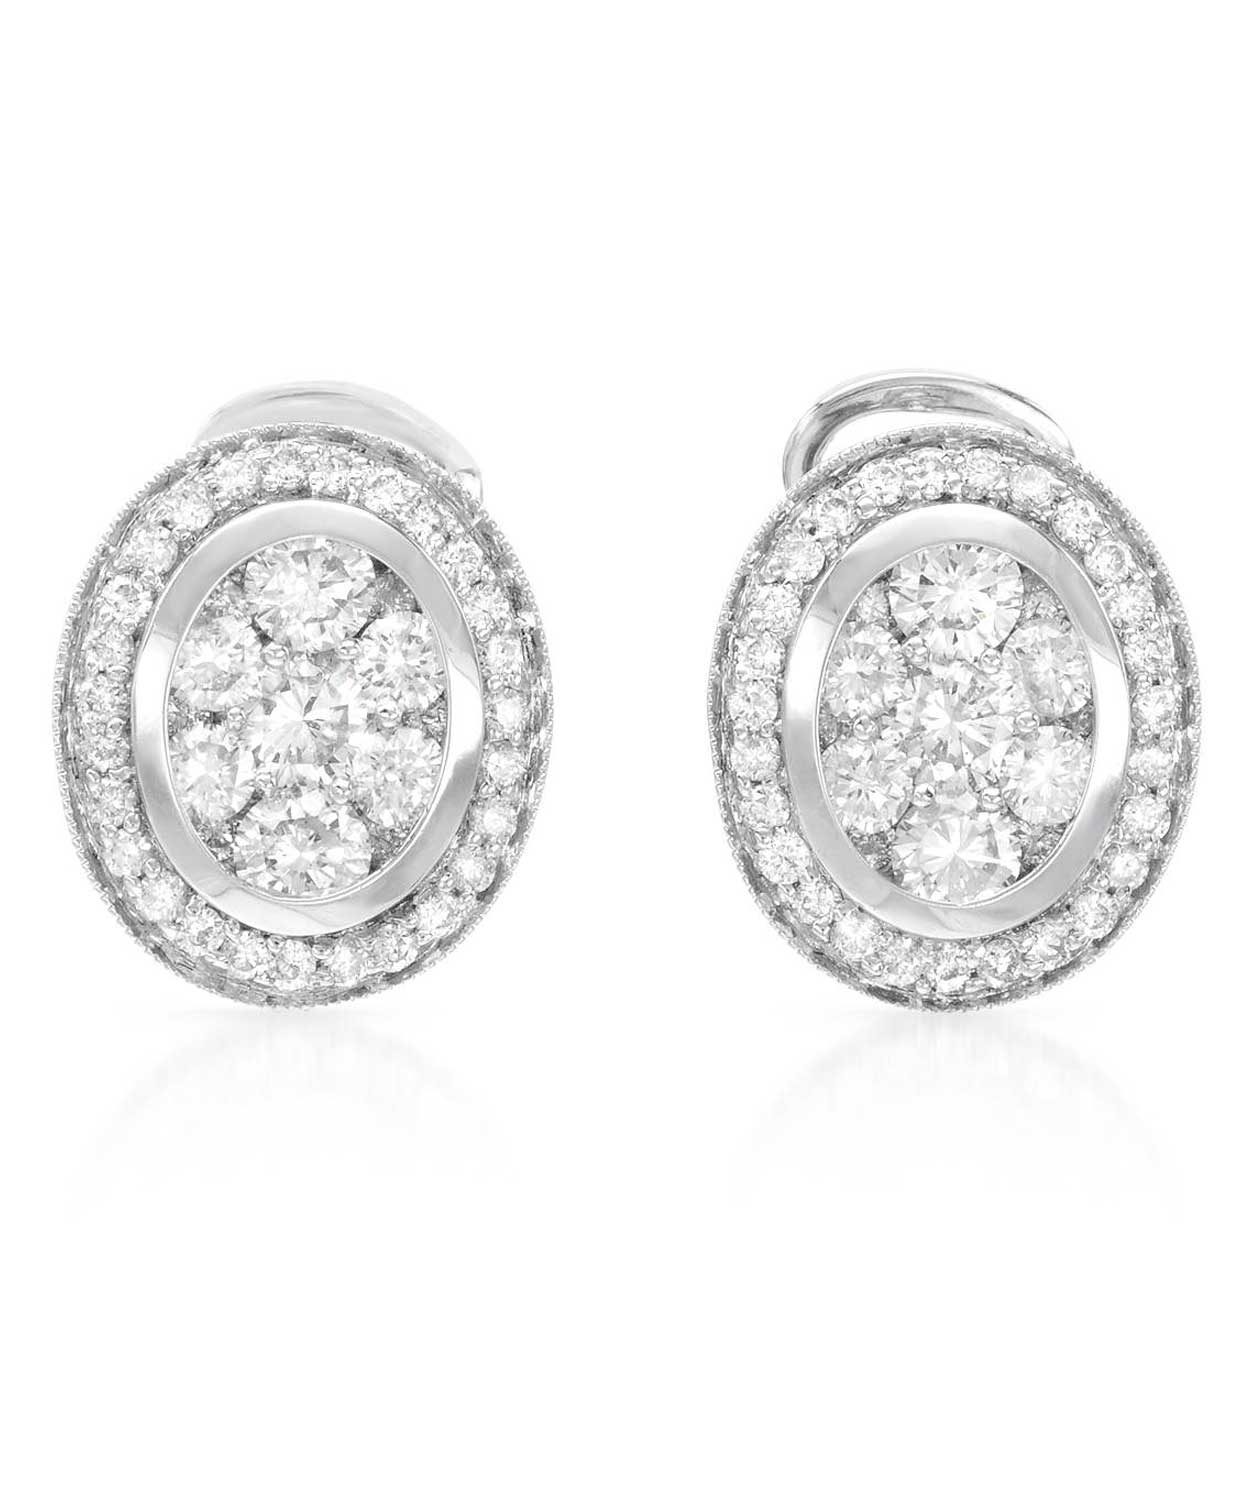 Signature Collection 2.00 ctw Diamond 14k White Gold Cluster Earrings View 1